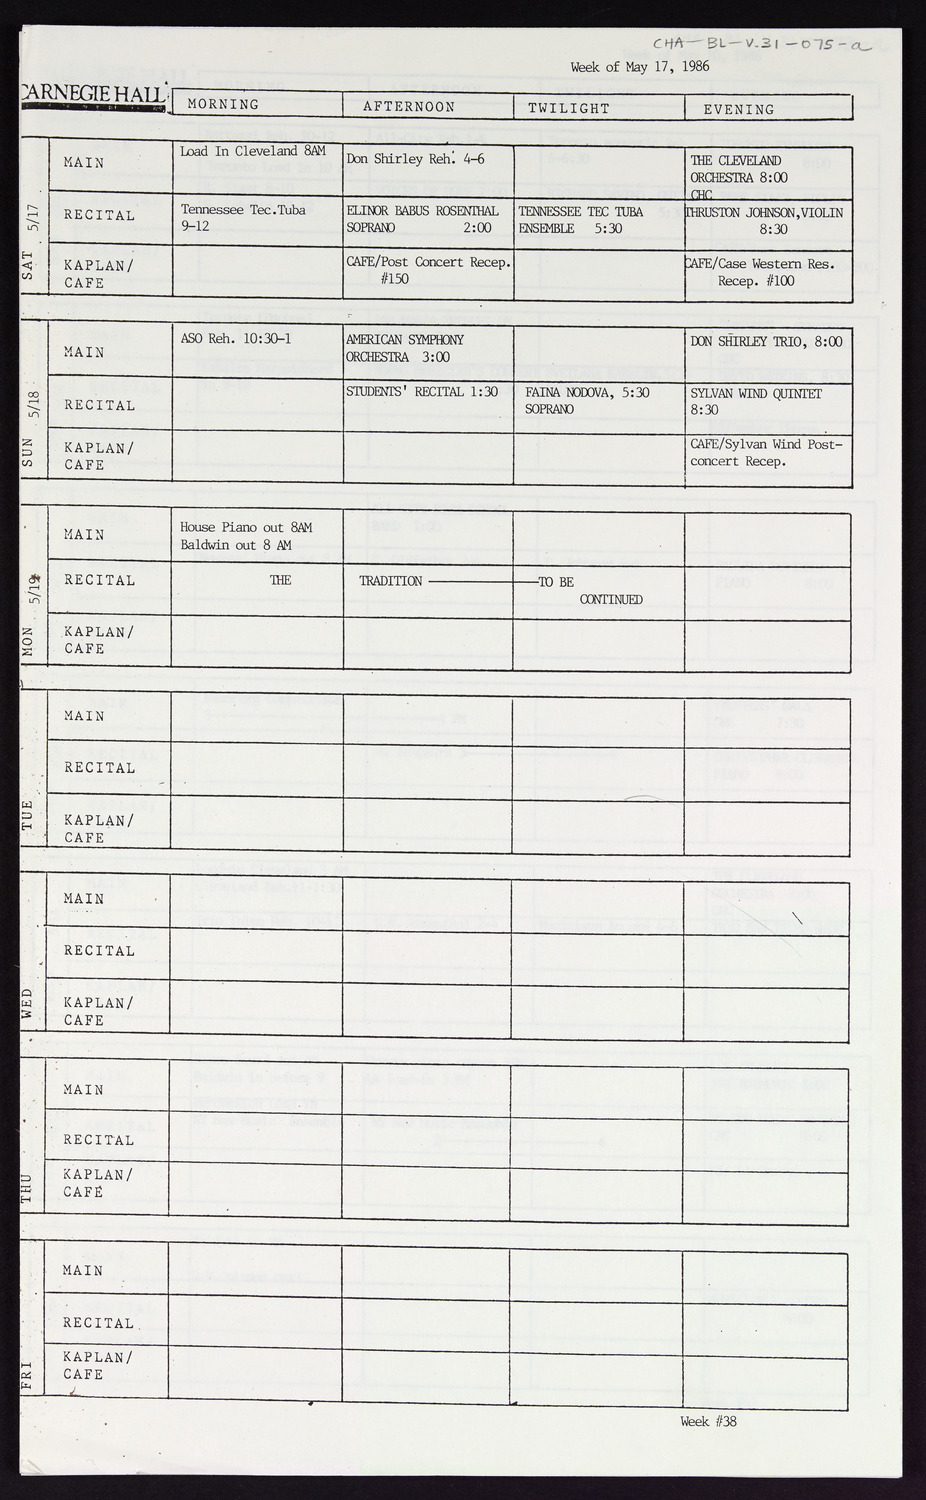 Carnegie Hall Booking Ledger, volume 31, page 75a